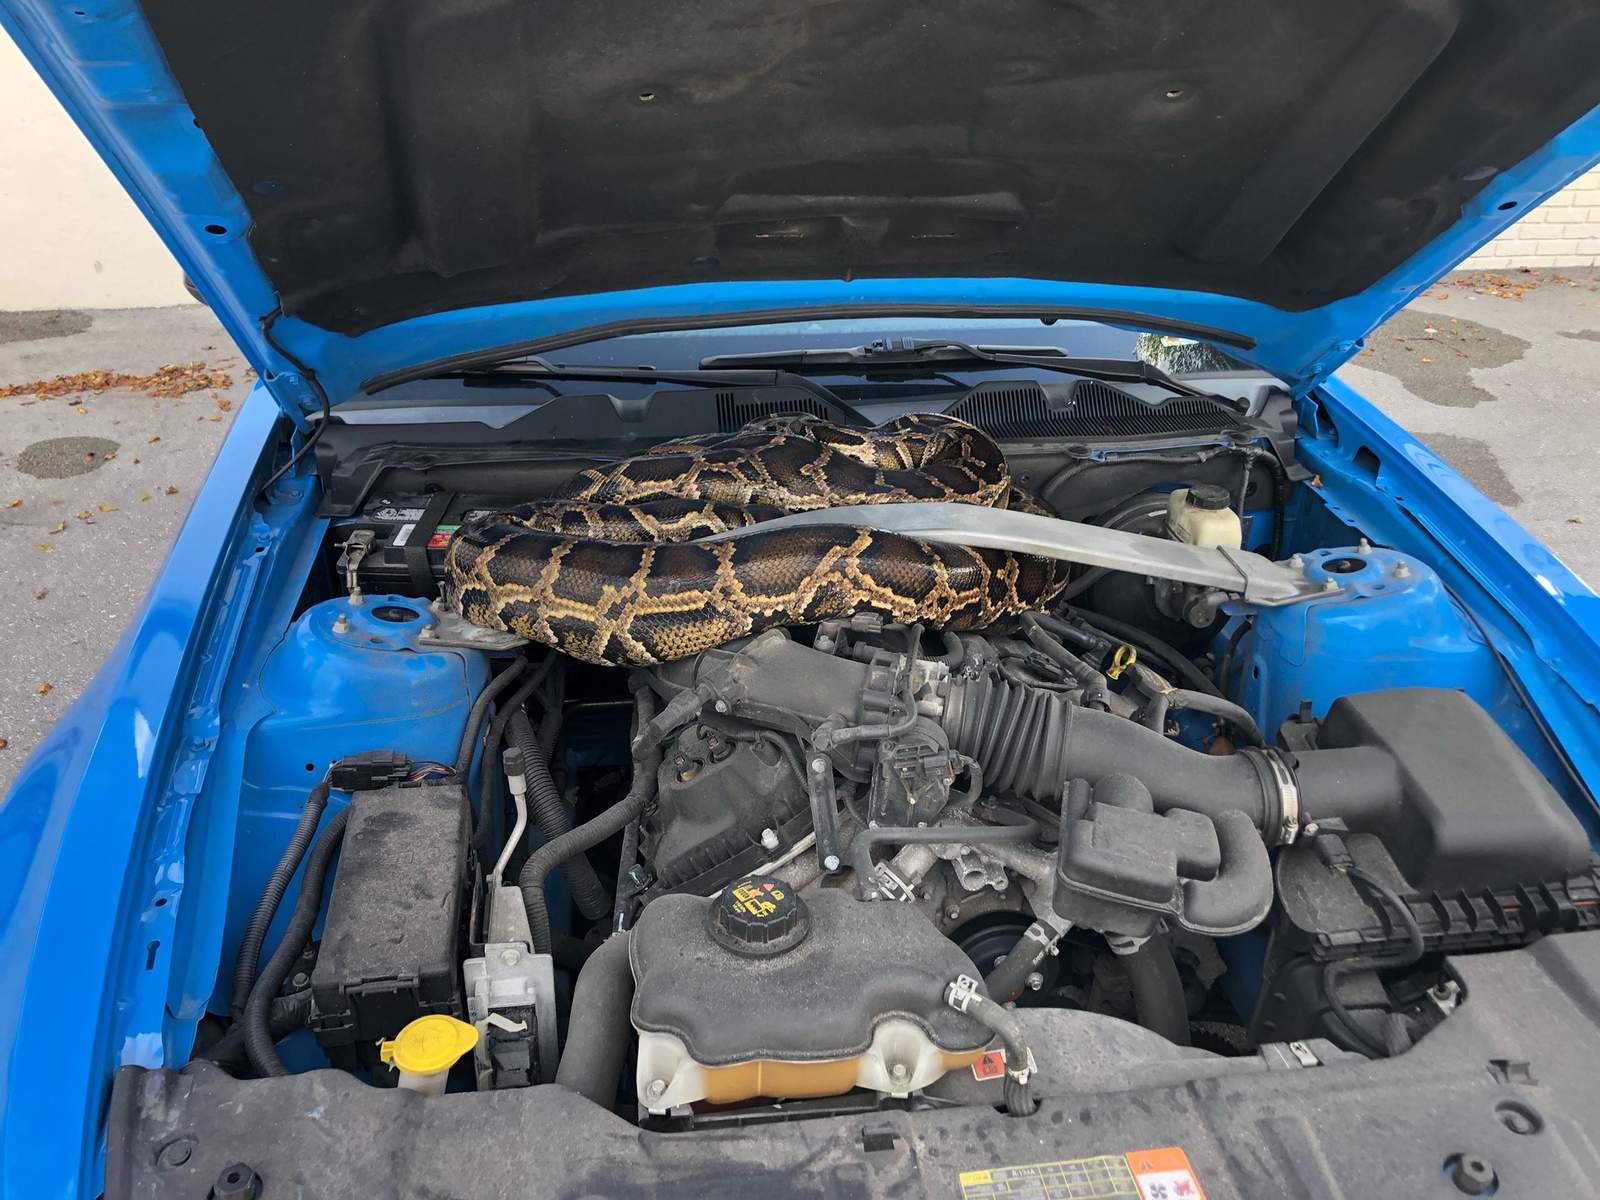 10-foot python removed from under car hood in Florida